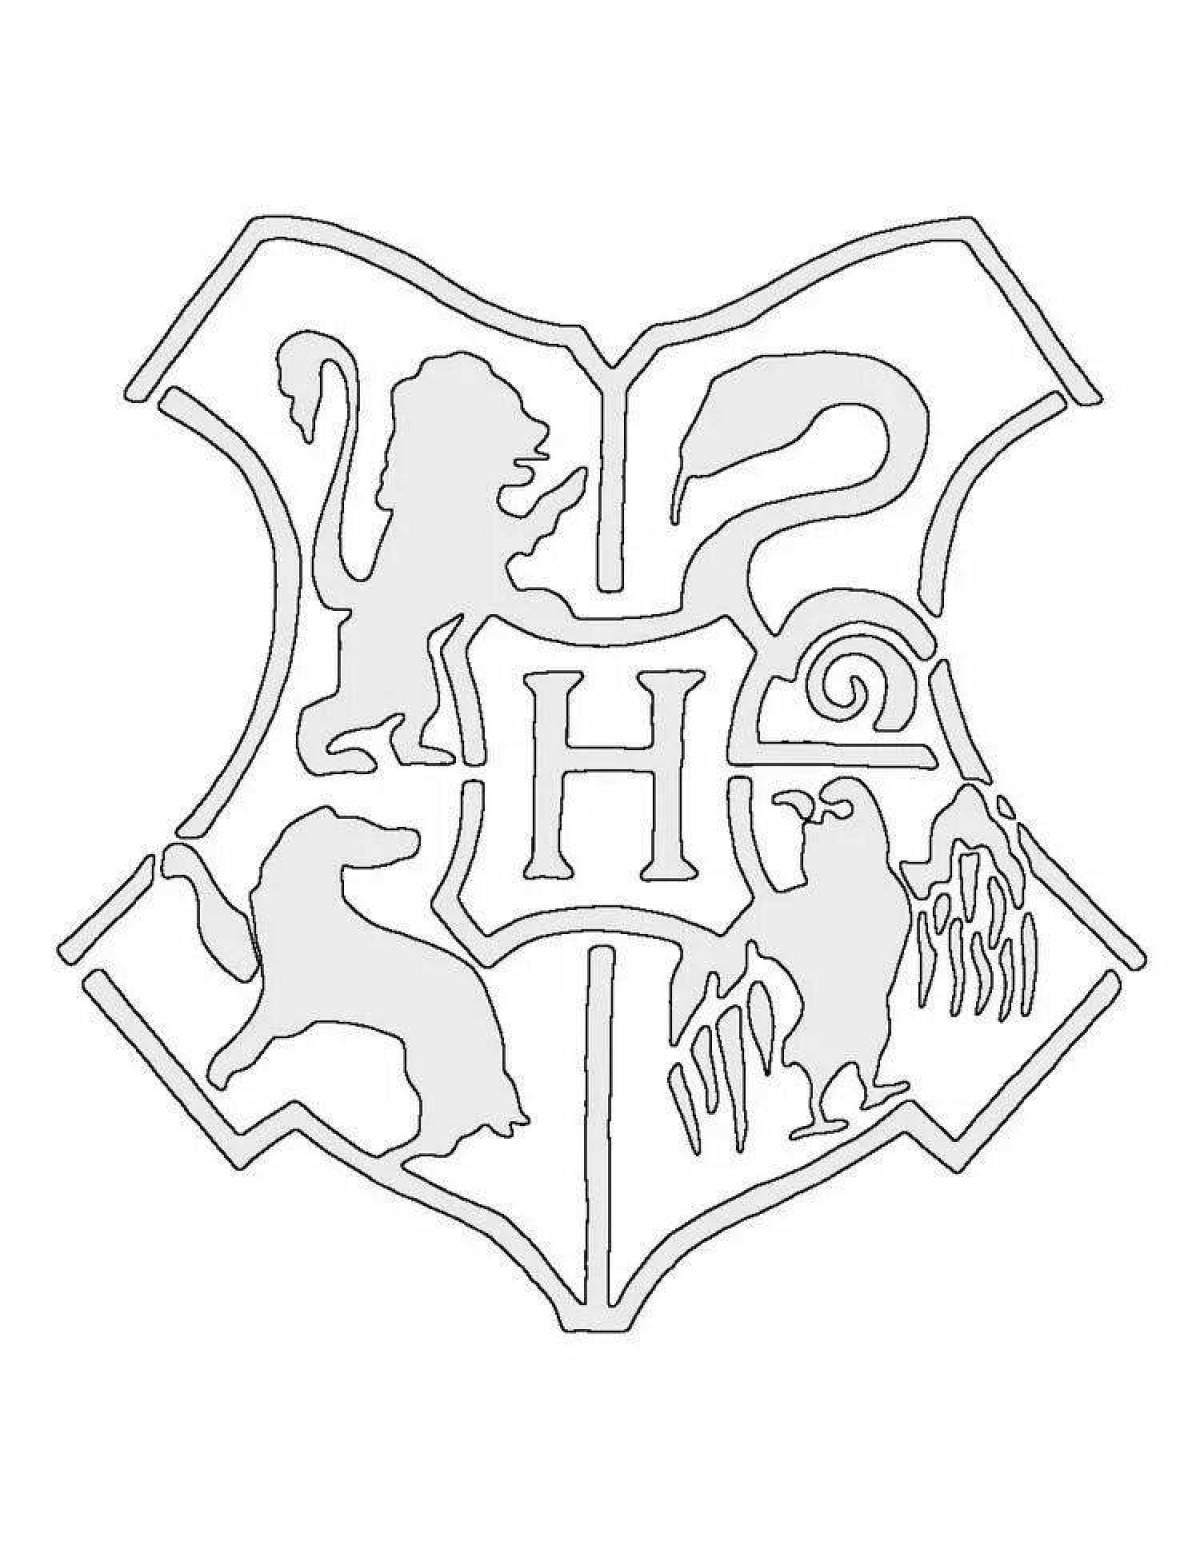 Coloring the royal coat of arms of hogwarts